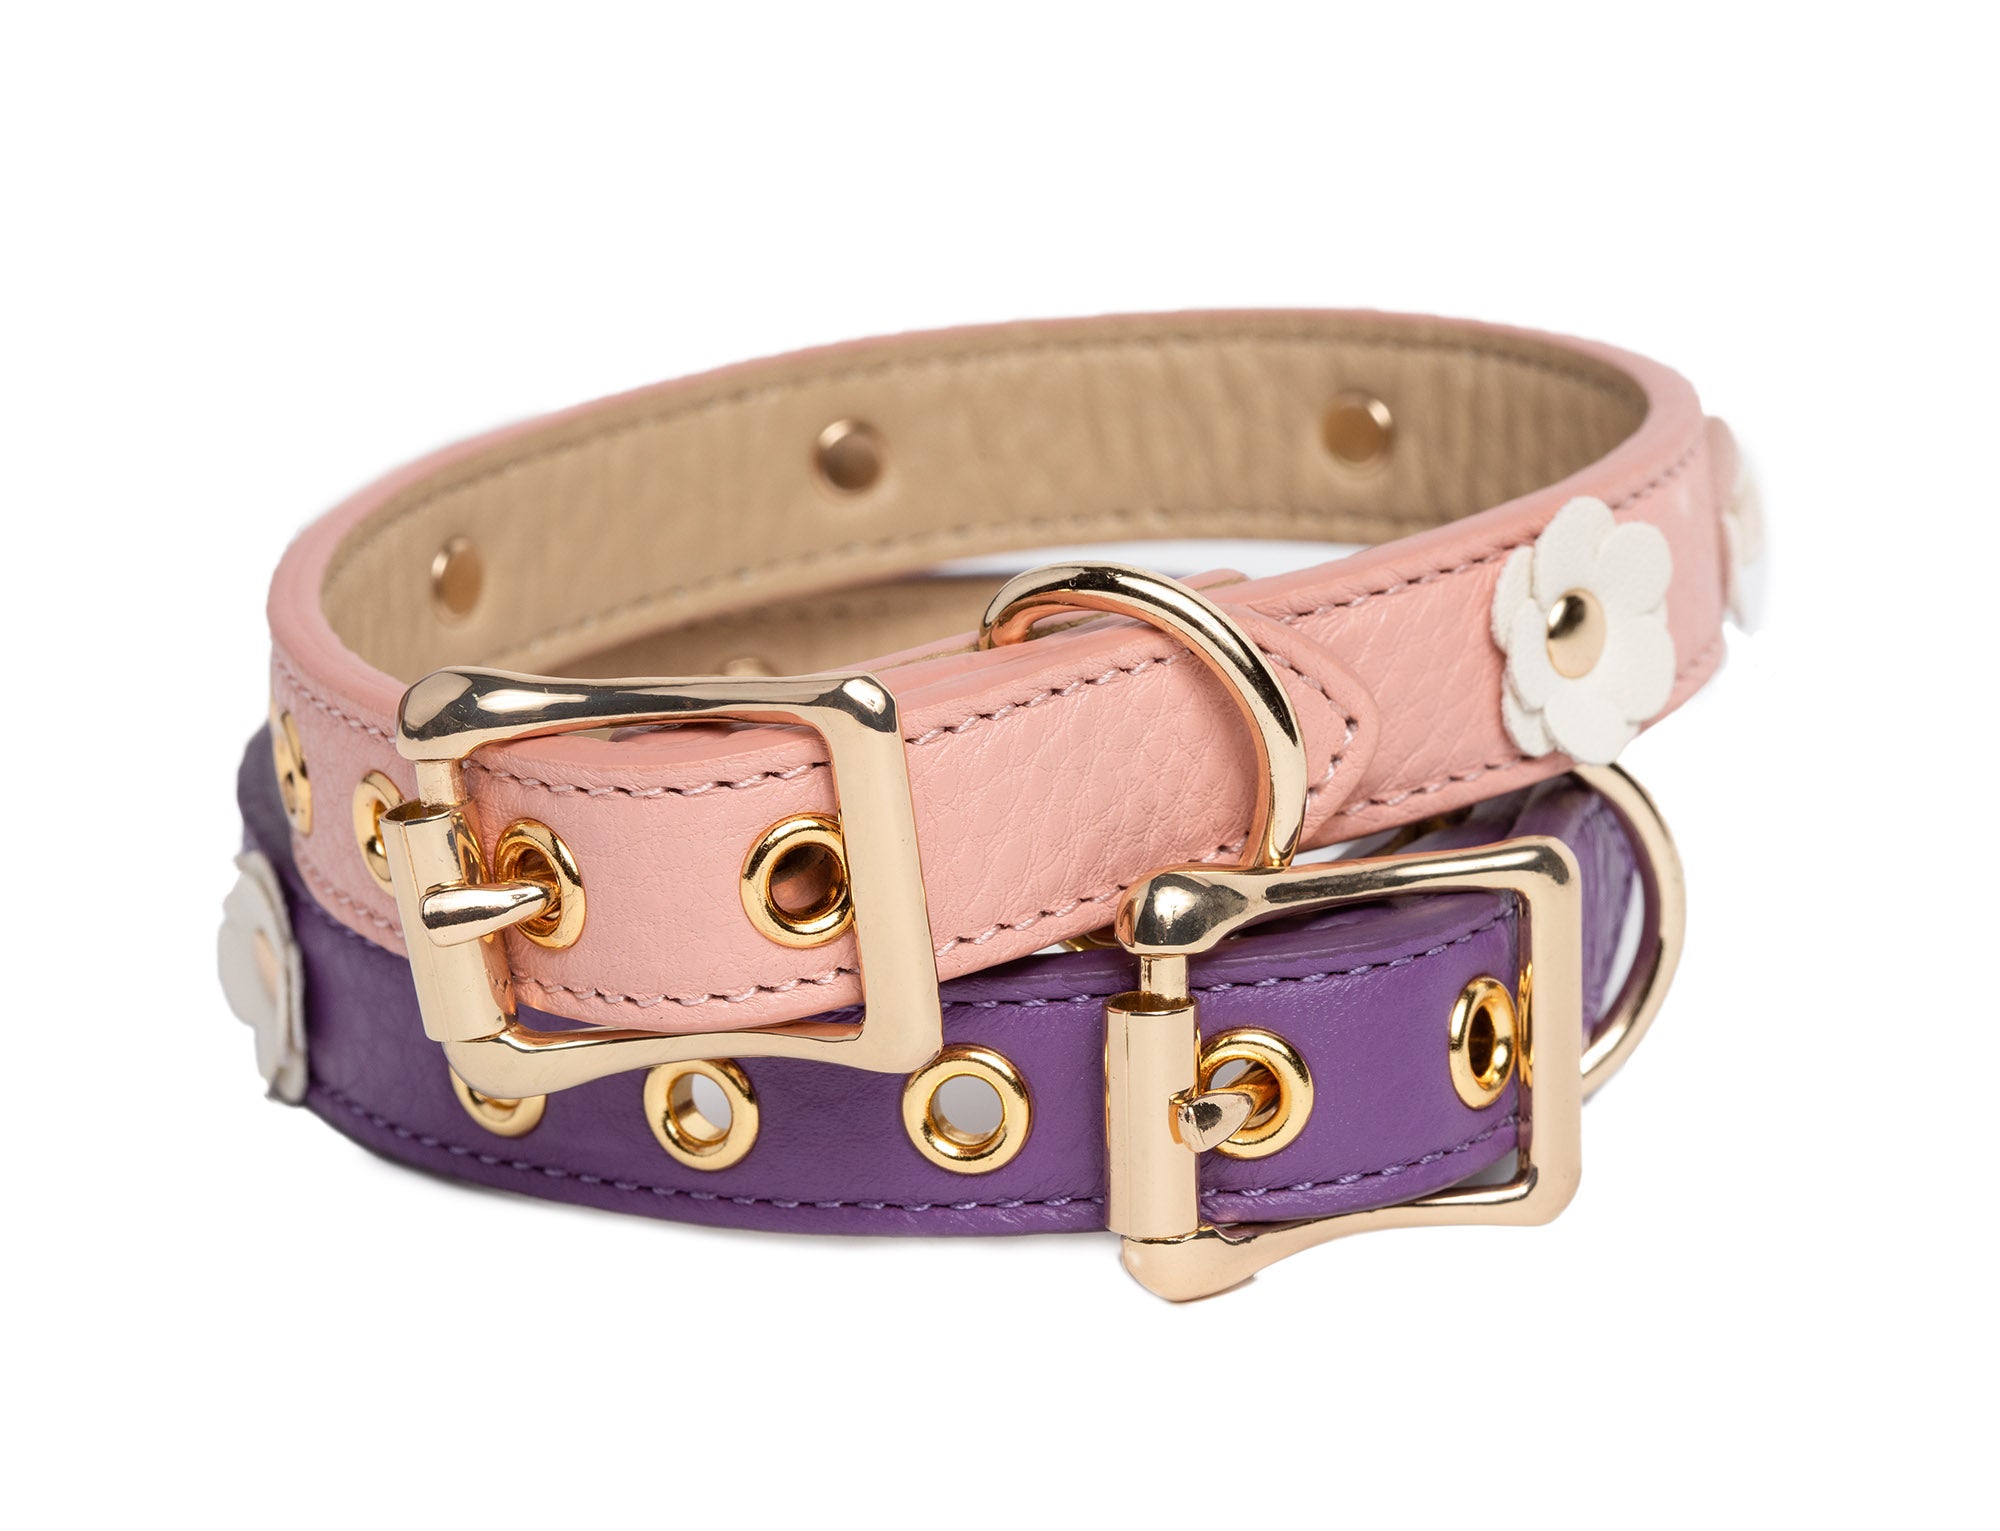 Dog Collar - Canine Styles Soft Leather Flower Dog Collar - Hot Pink, Light Pink or Purple